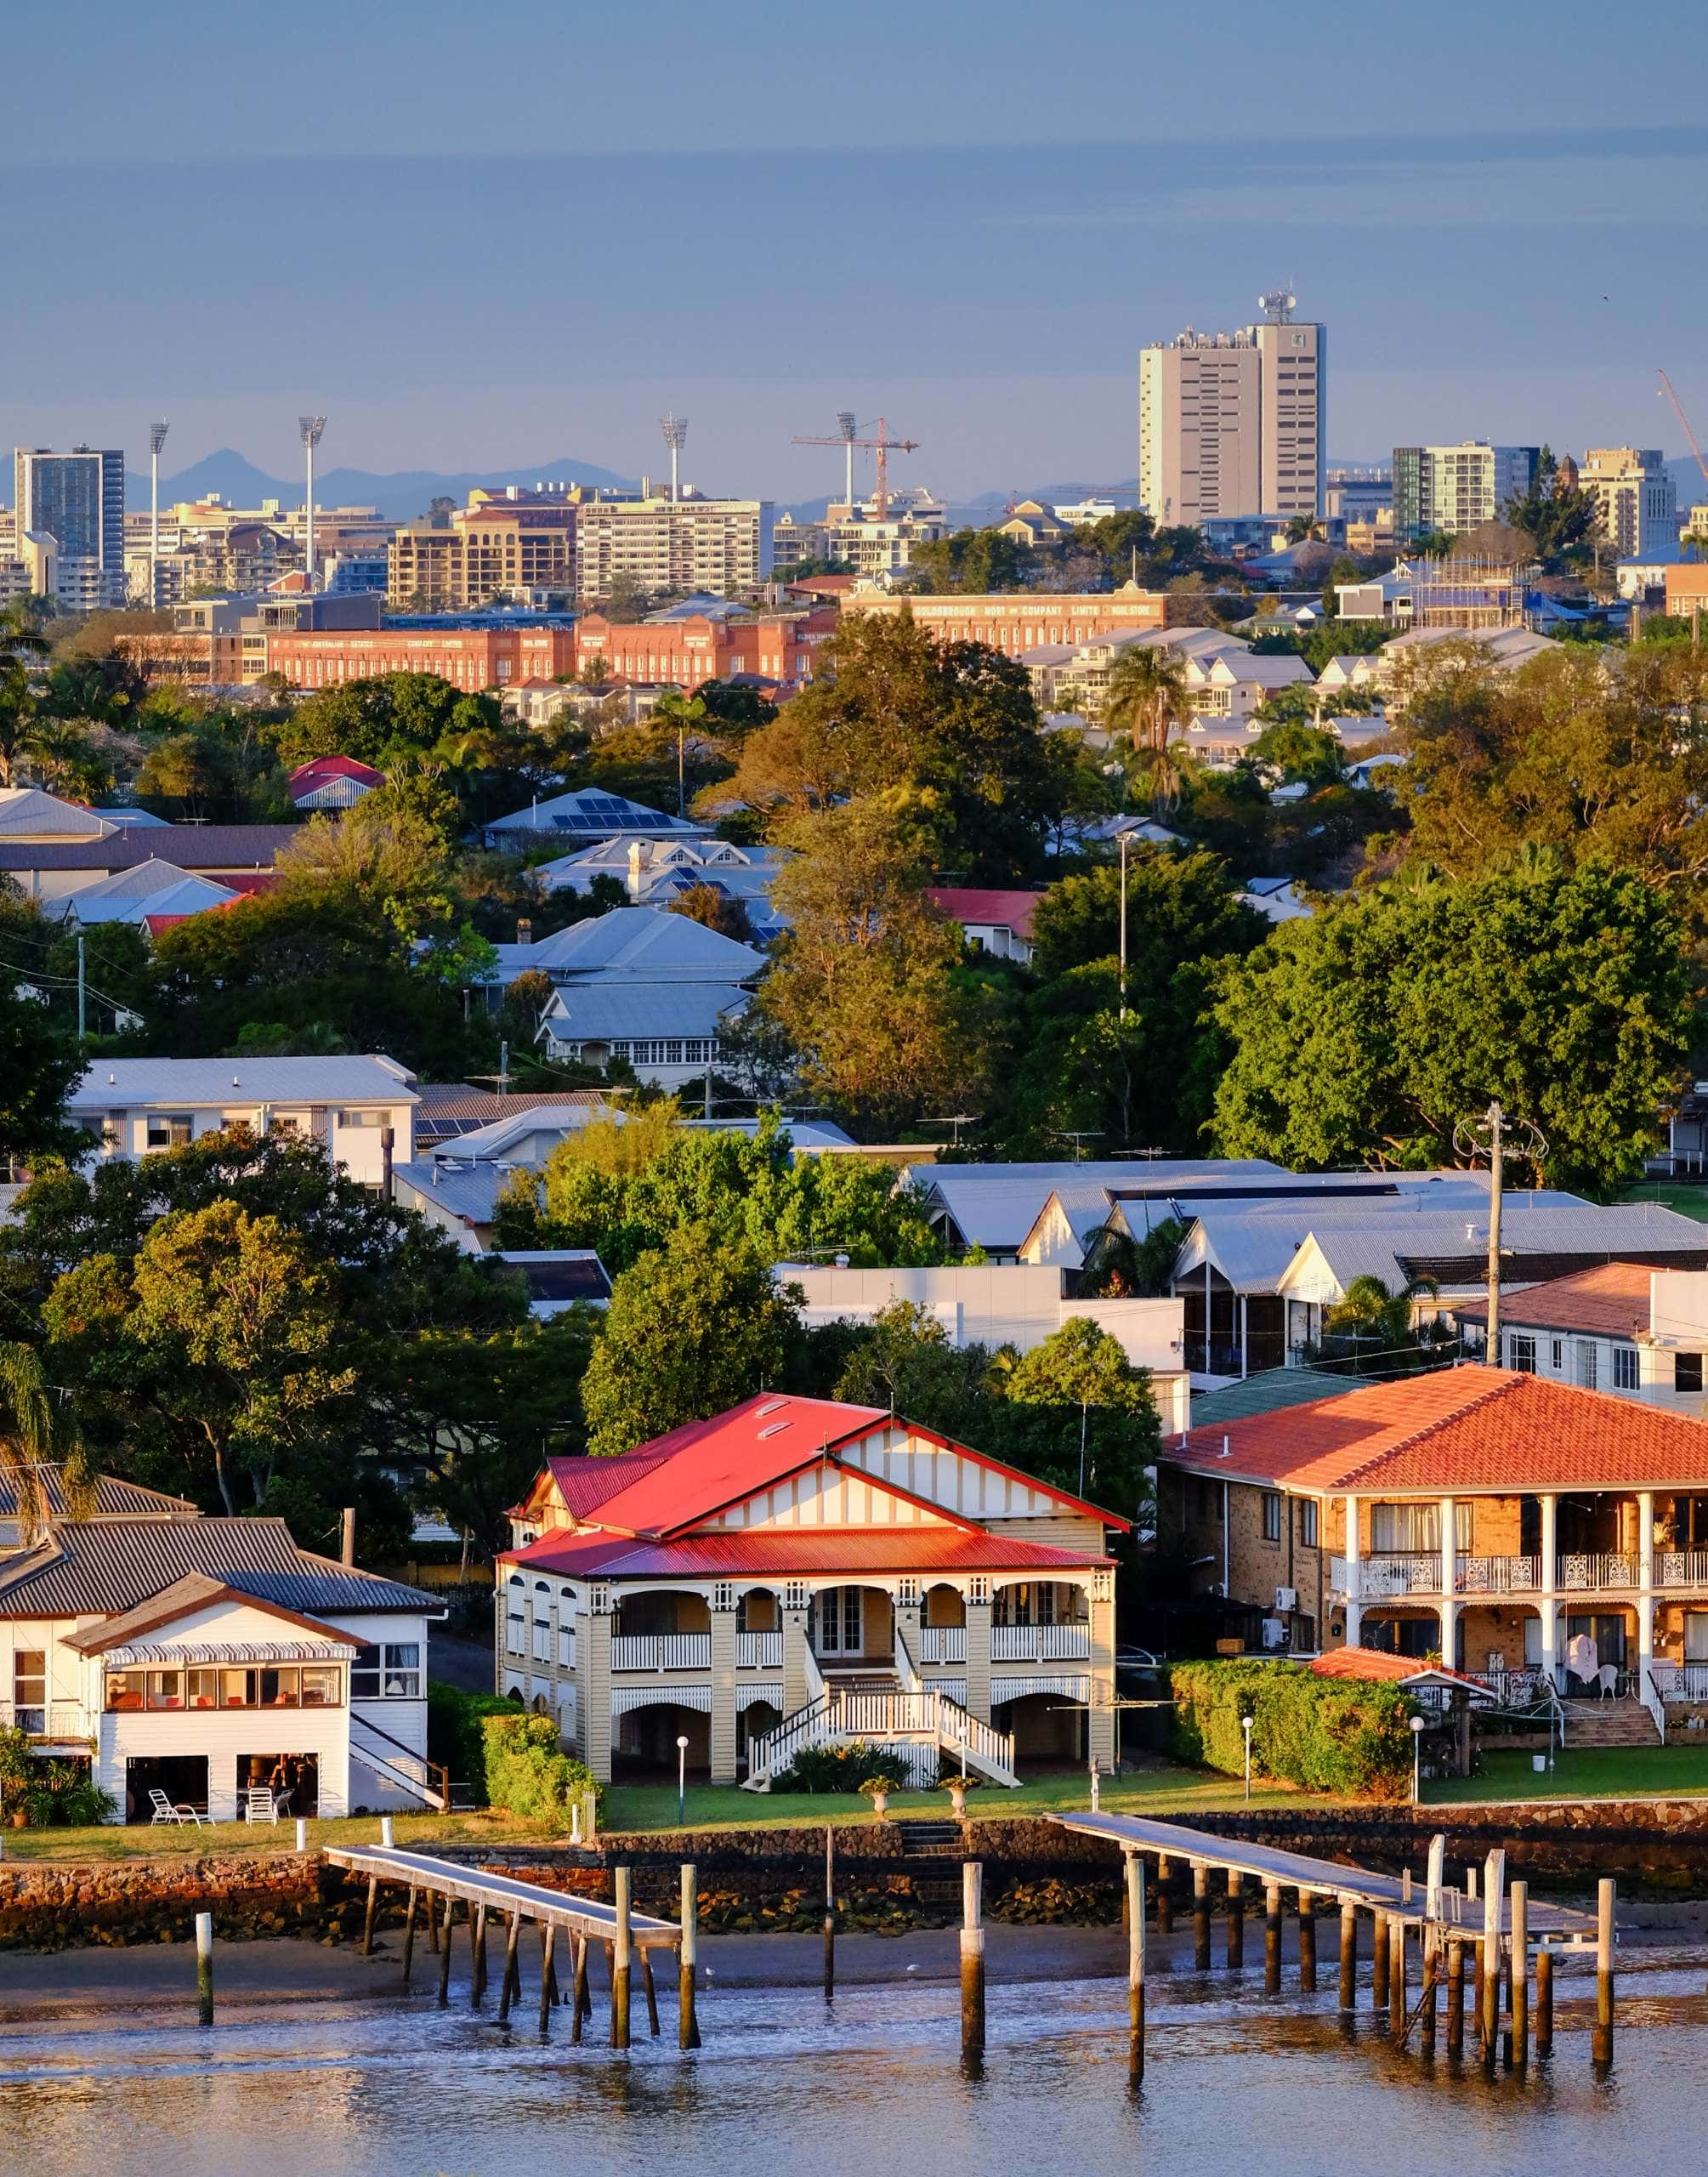 Image of Brisbane and Woolloongabba, accompanying family law article "Severing a Joint Tenancy"